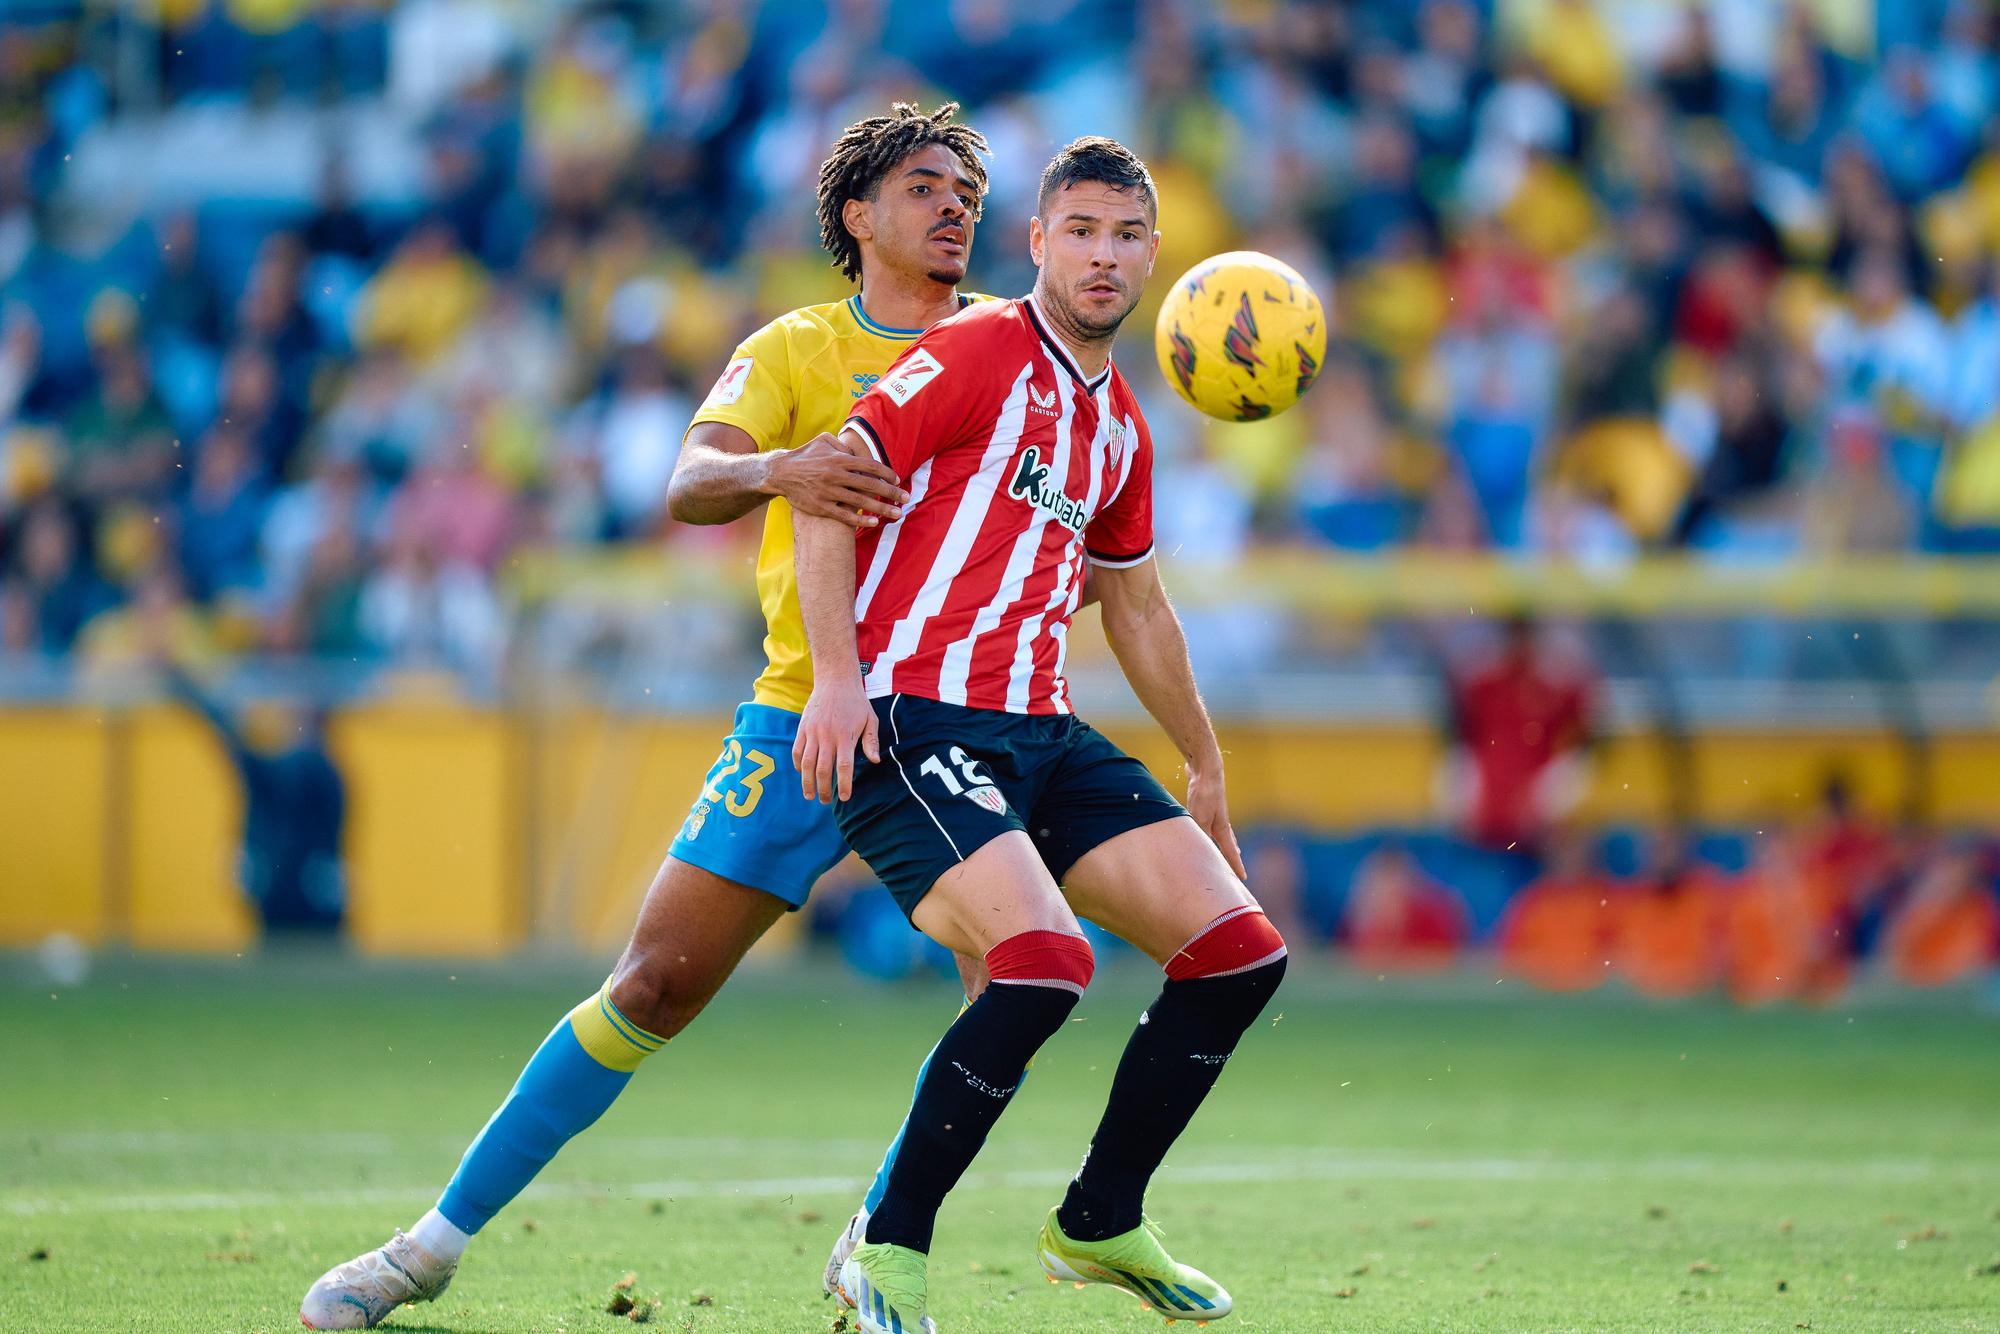 Gorka Guruzeta of Athletic Club competes for the ball with Saul Coco of UD Las Palmas during the Spanish league, La Liga EA Sports, football match played between UD Las Palmas and Athletic Club at Estadio Gran Canaria on March 10, 2024, in Las Palmas de Gran Canaria, Spain. AFP7 10/03/2024 ONLY FOR USE IN SPAIN / Gabriel Jimenez / AFP7 / Europa Press;2024;SOCCER;Sport;ZSOCCER;ZSPORT;UD Las Palmas v Athletic Club - La Liga EA Sports;